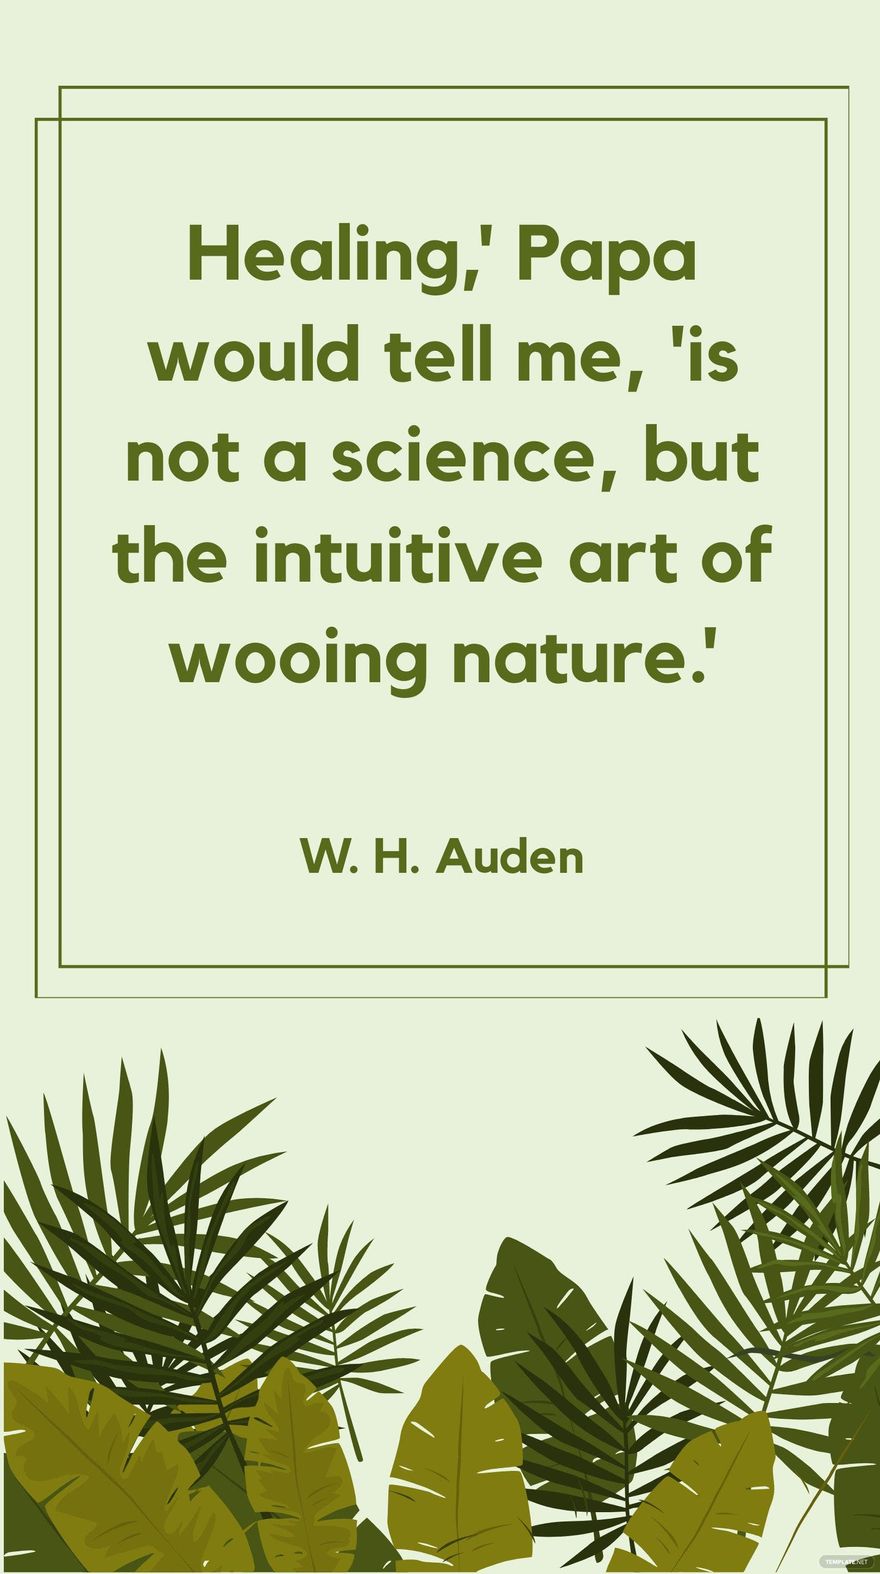 W. H. Auden - Healing,' Papa would tell me, 'is not a science, but the intuitive art of wooing nature.'